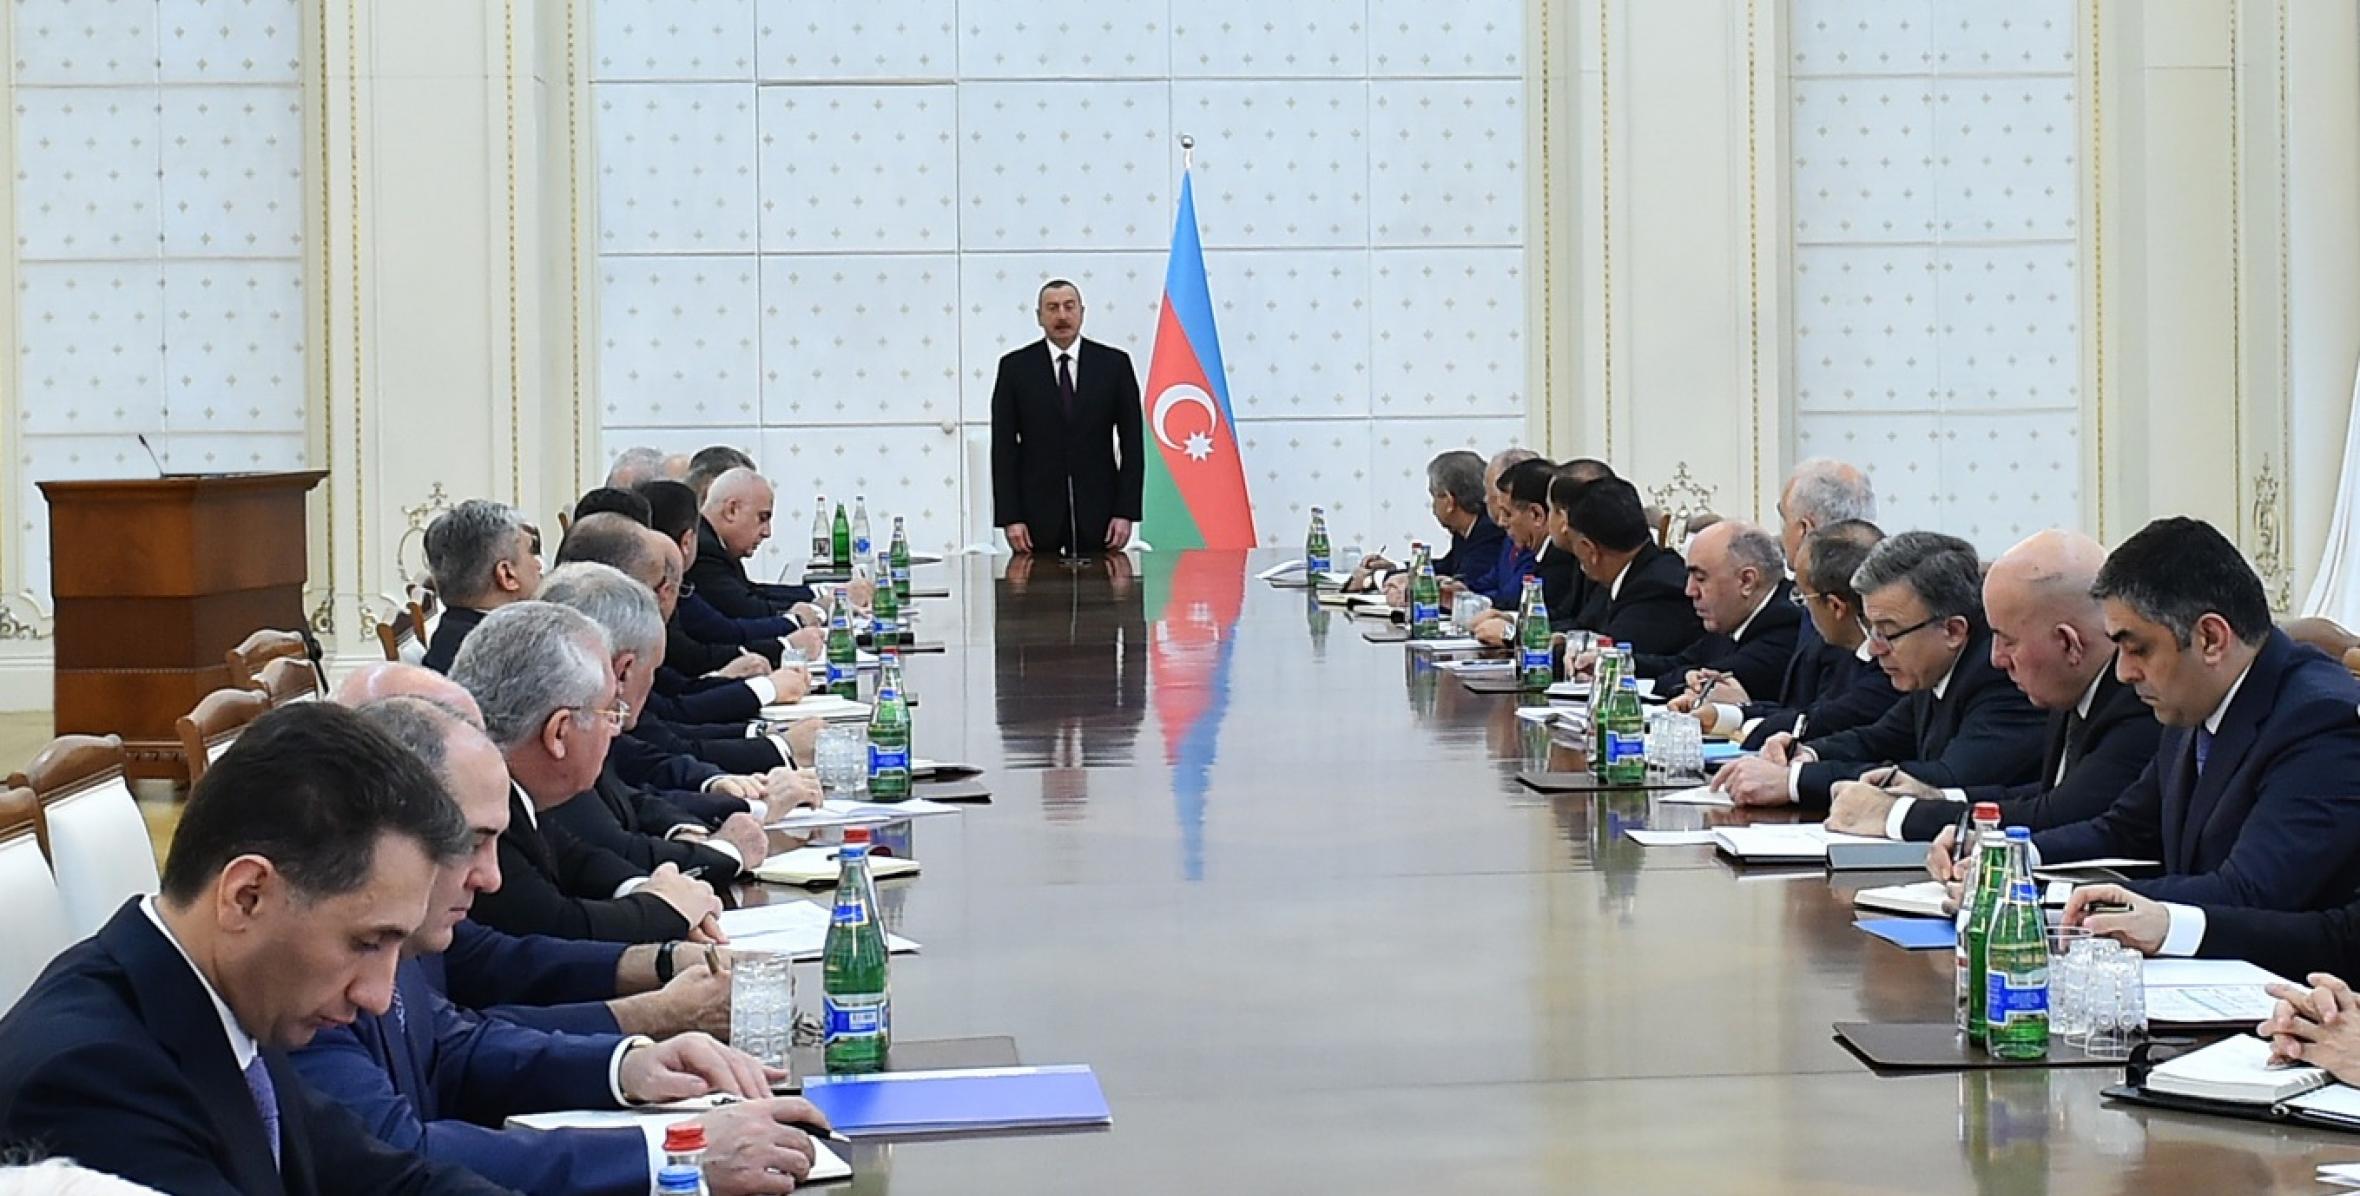 Opening speech by Ilham Aliyev at the meeting of Cabinet of Ministers dedicated to results of socioeconomic development of 2017 and objectives for future